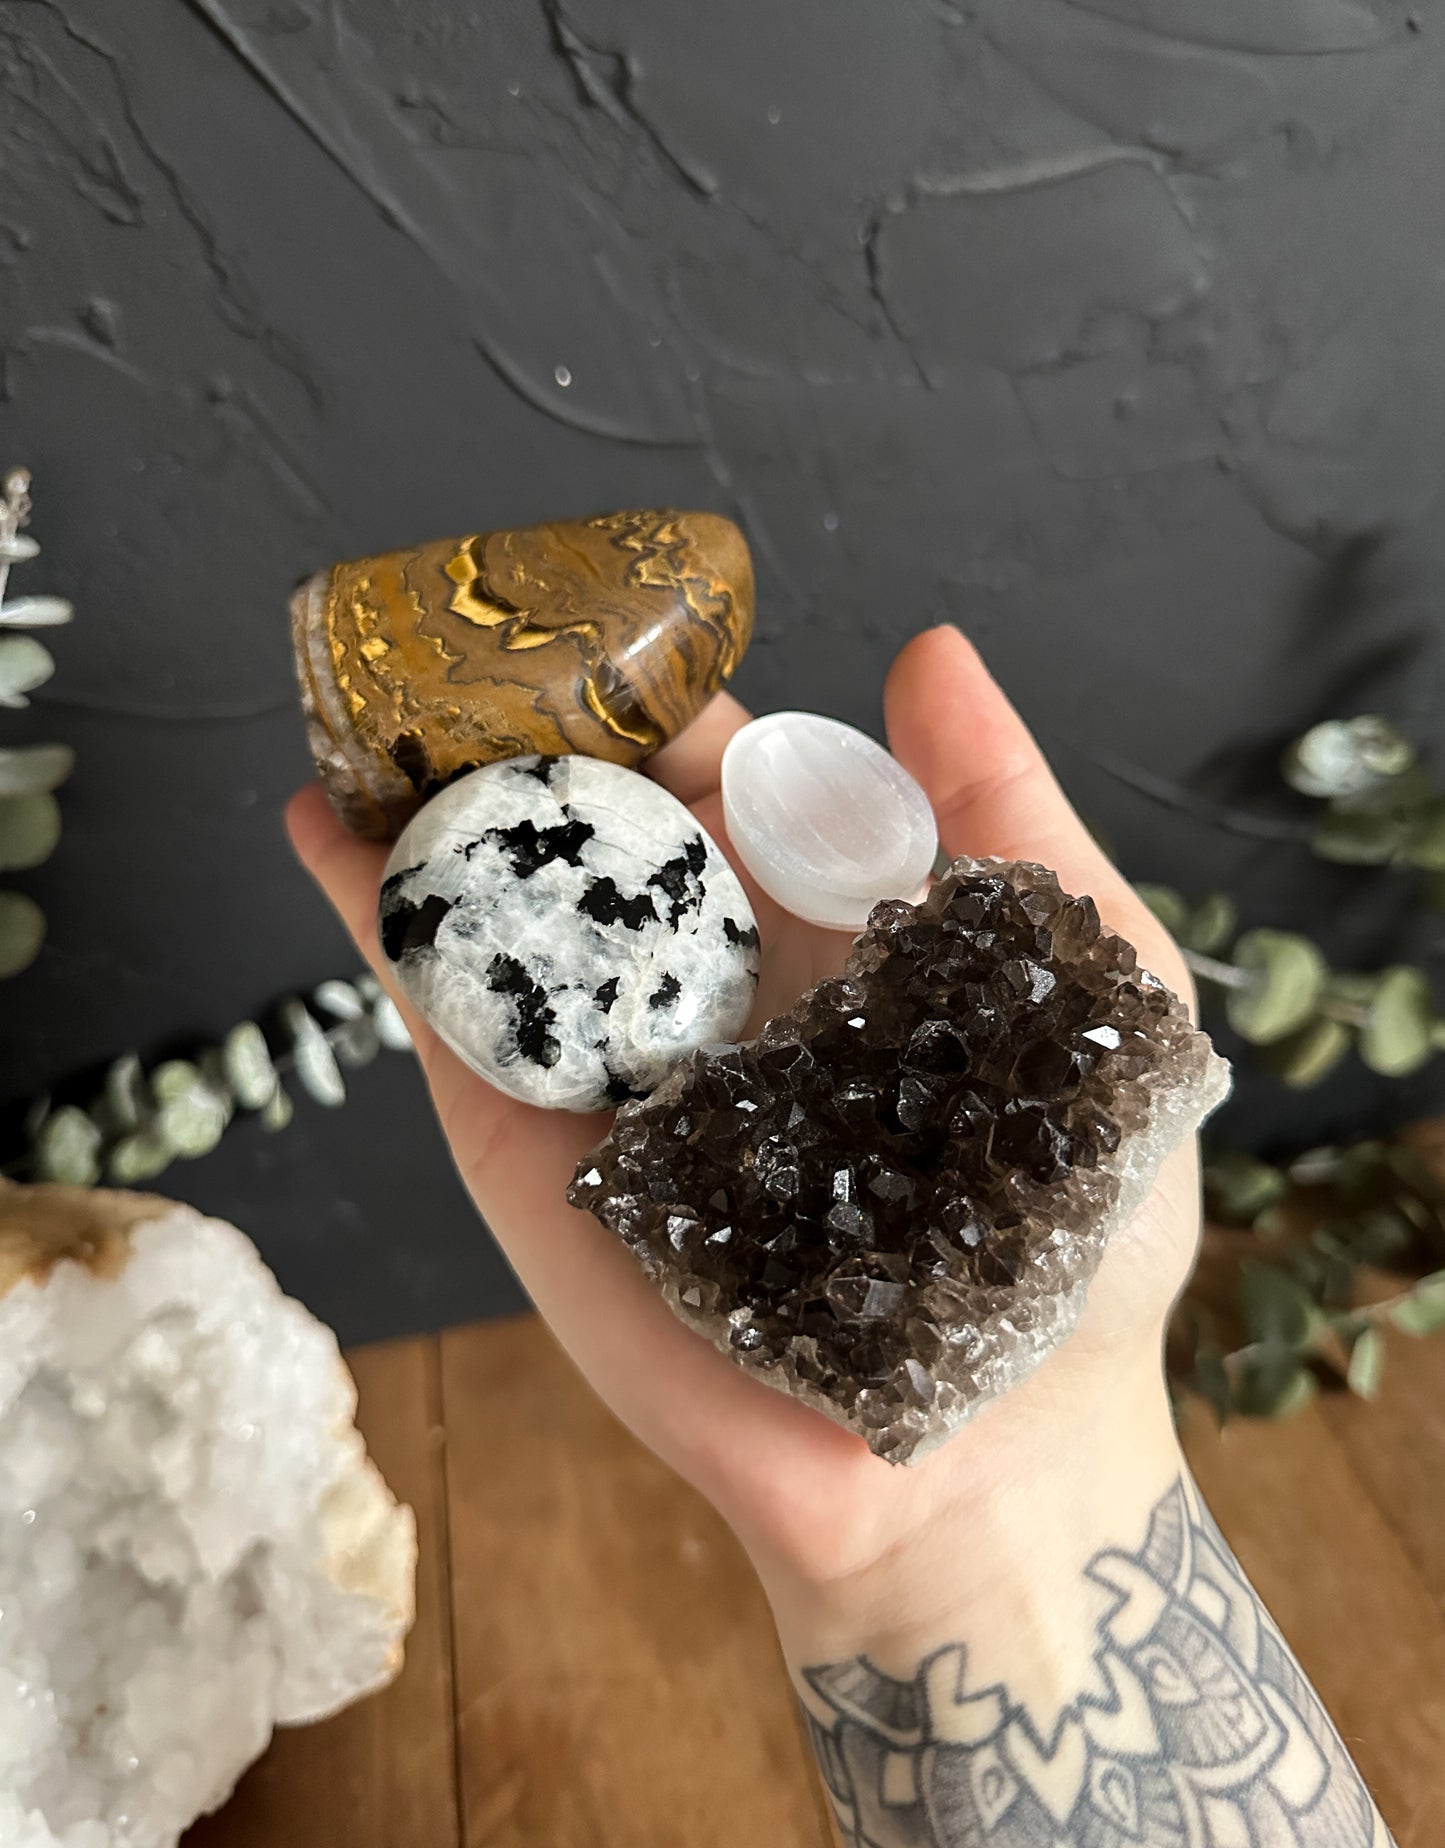 Find peace with our Anxiety Relief Crystal Kit, featuring Tigers Eye, Smoky Quartz, Moonstone, and Selenite.